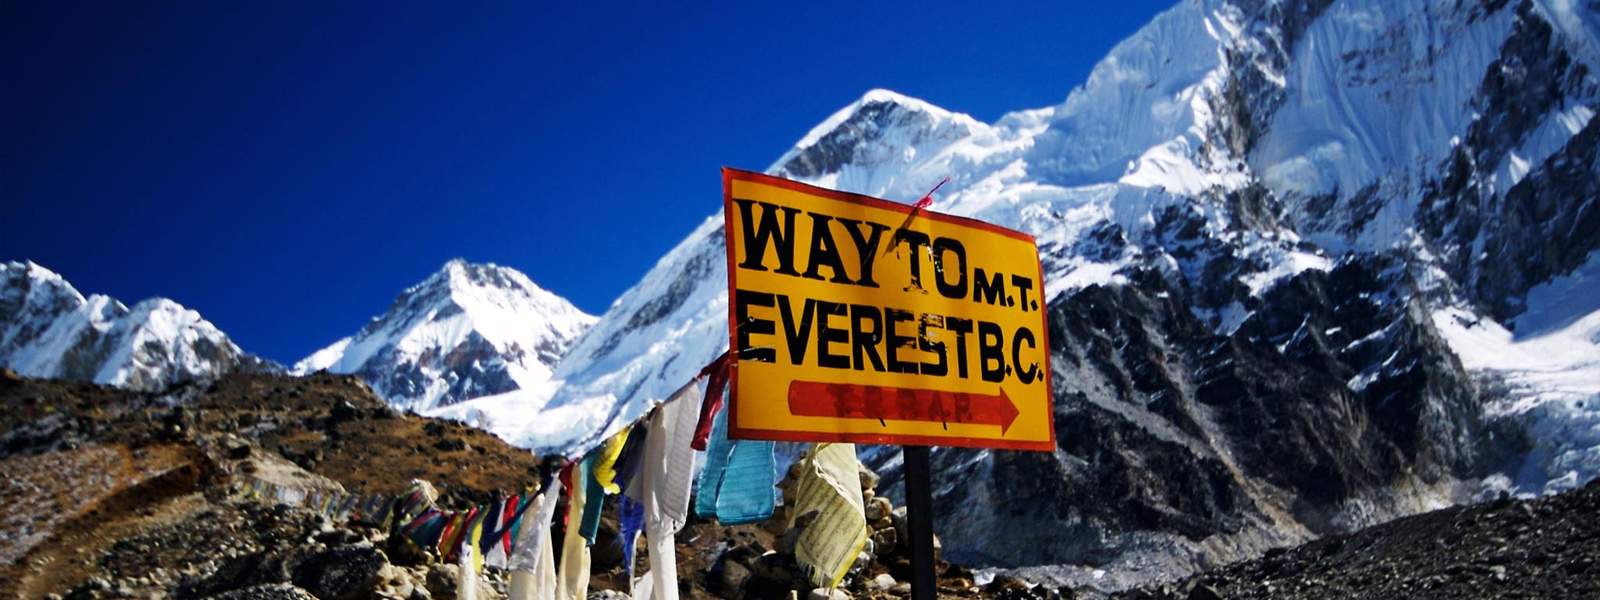 Everest And Rolwaling Traverse - 28 Days